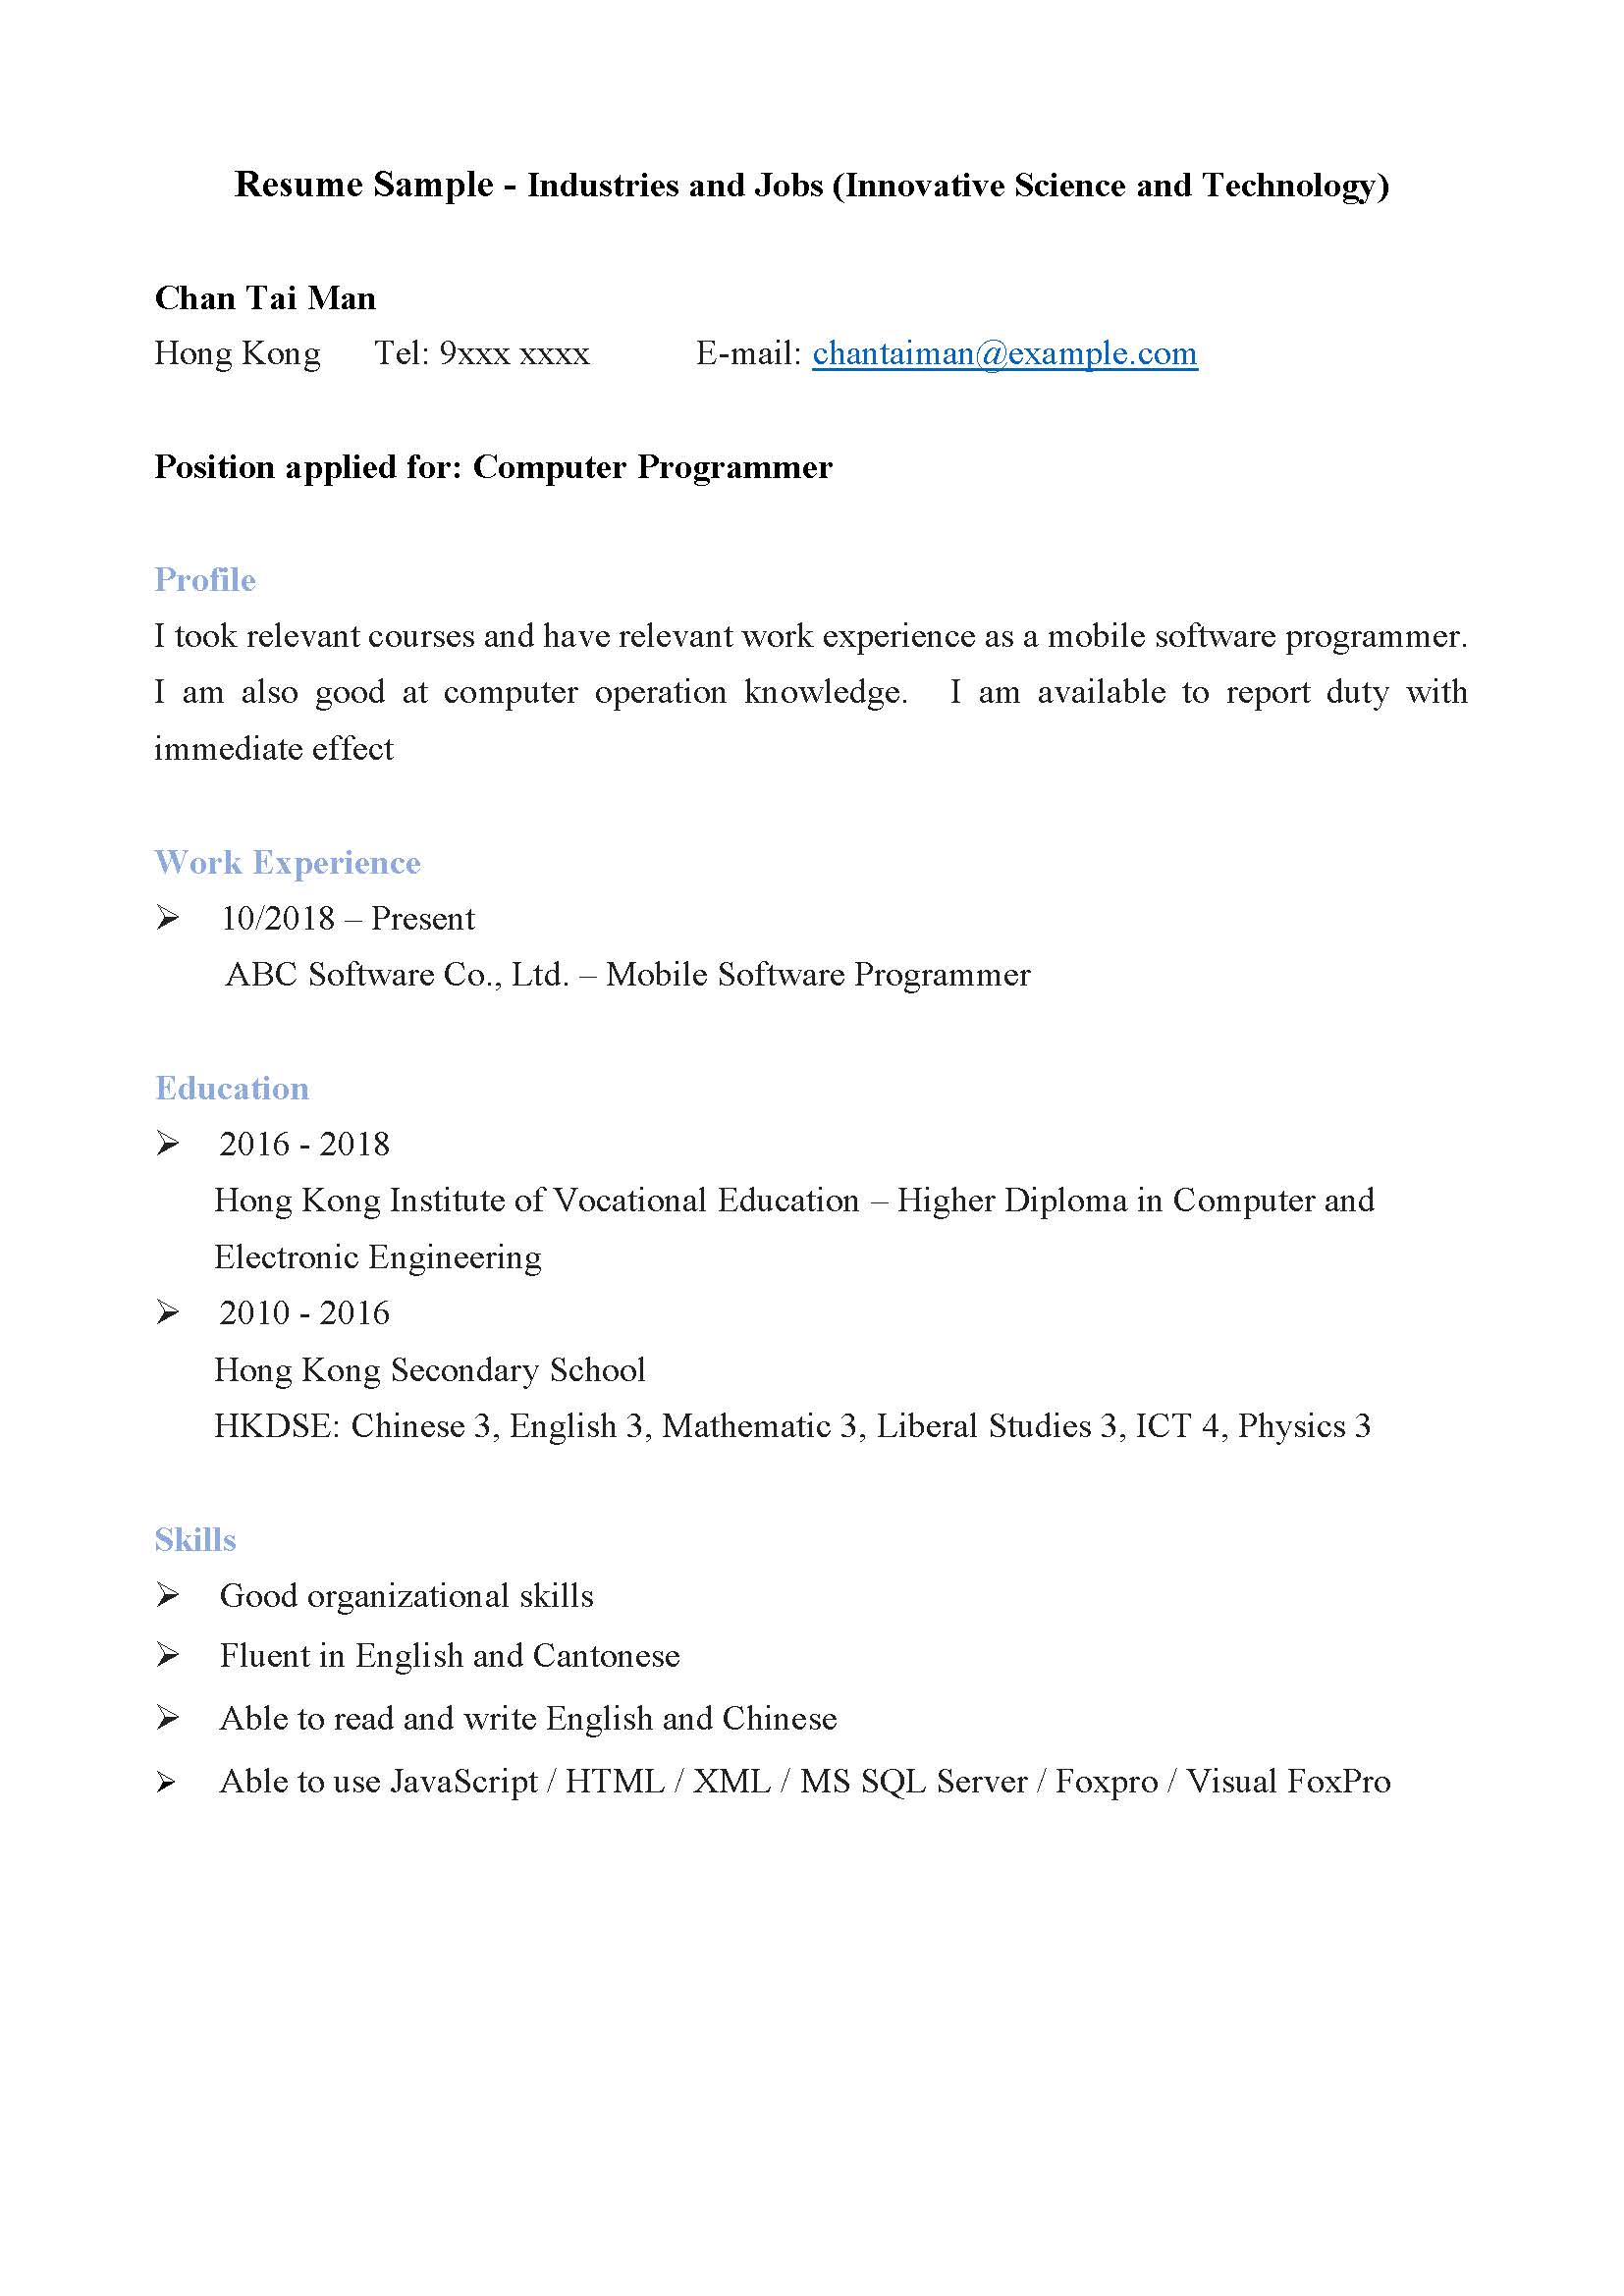 Innovative Science and Technology Resume Sample